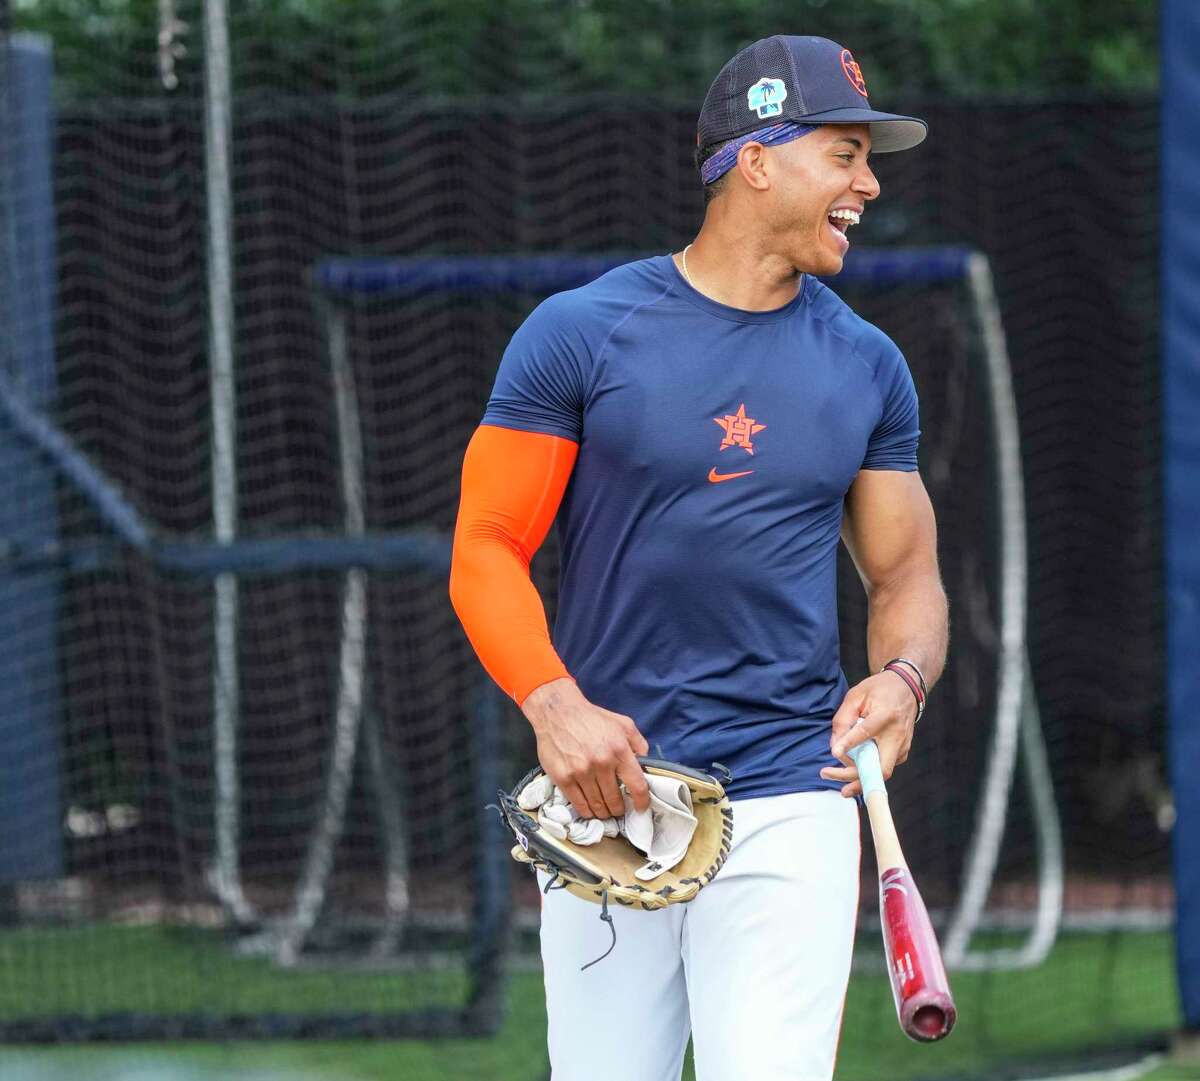 Houston Astros shortstop Jeremy Peña after workouts at the Astros spring training complex at The Ballpark of the Palm Beaches on Friday, Feb. 17, 2023 in West Palm Beach .